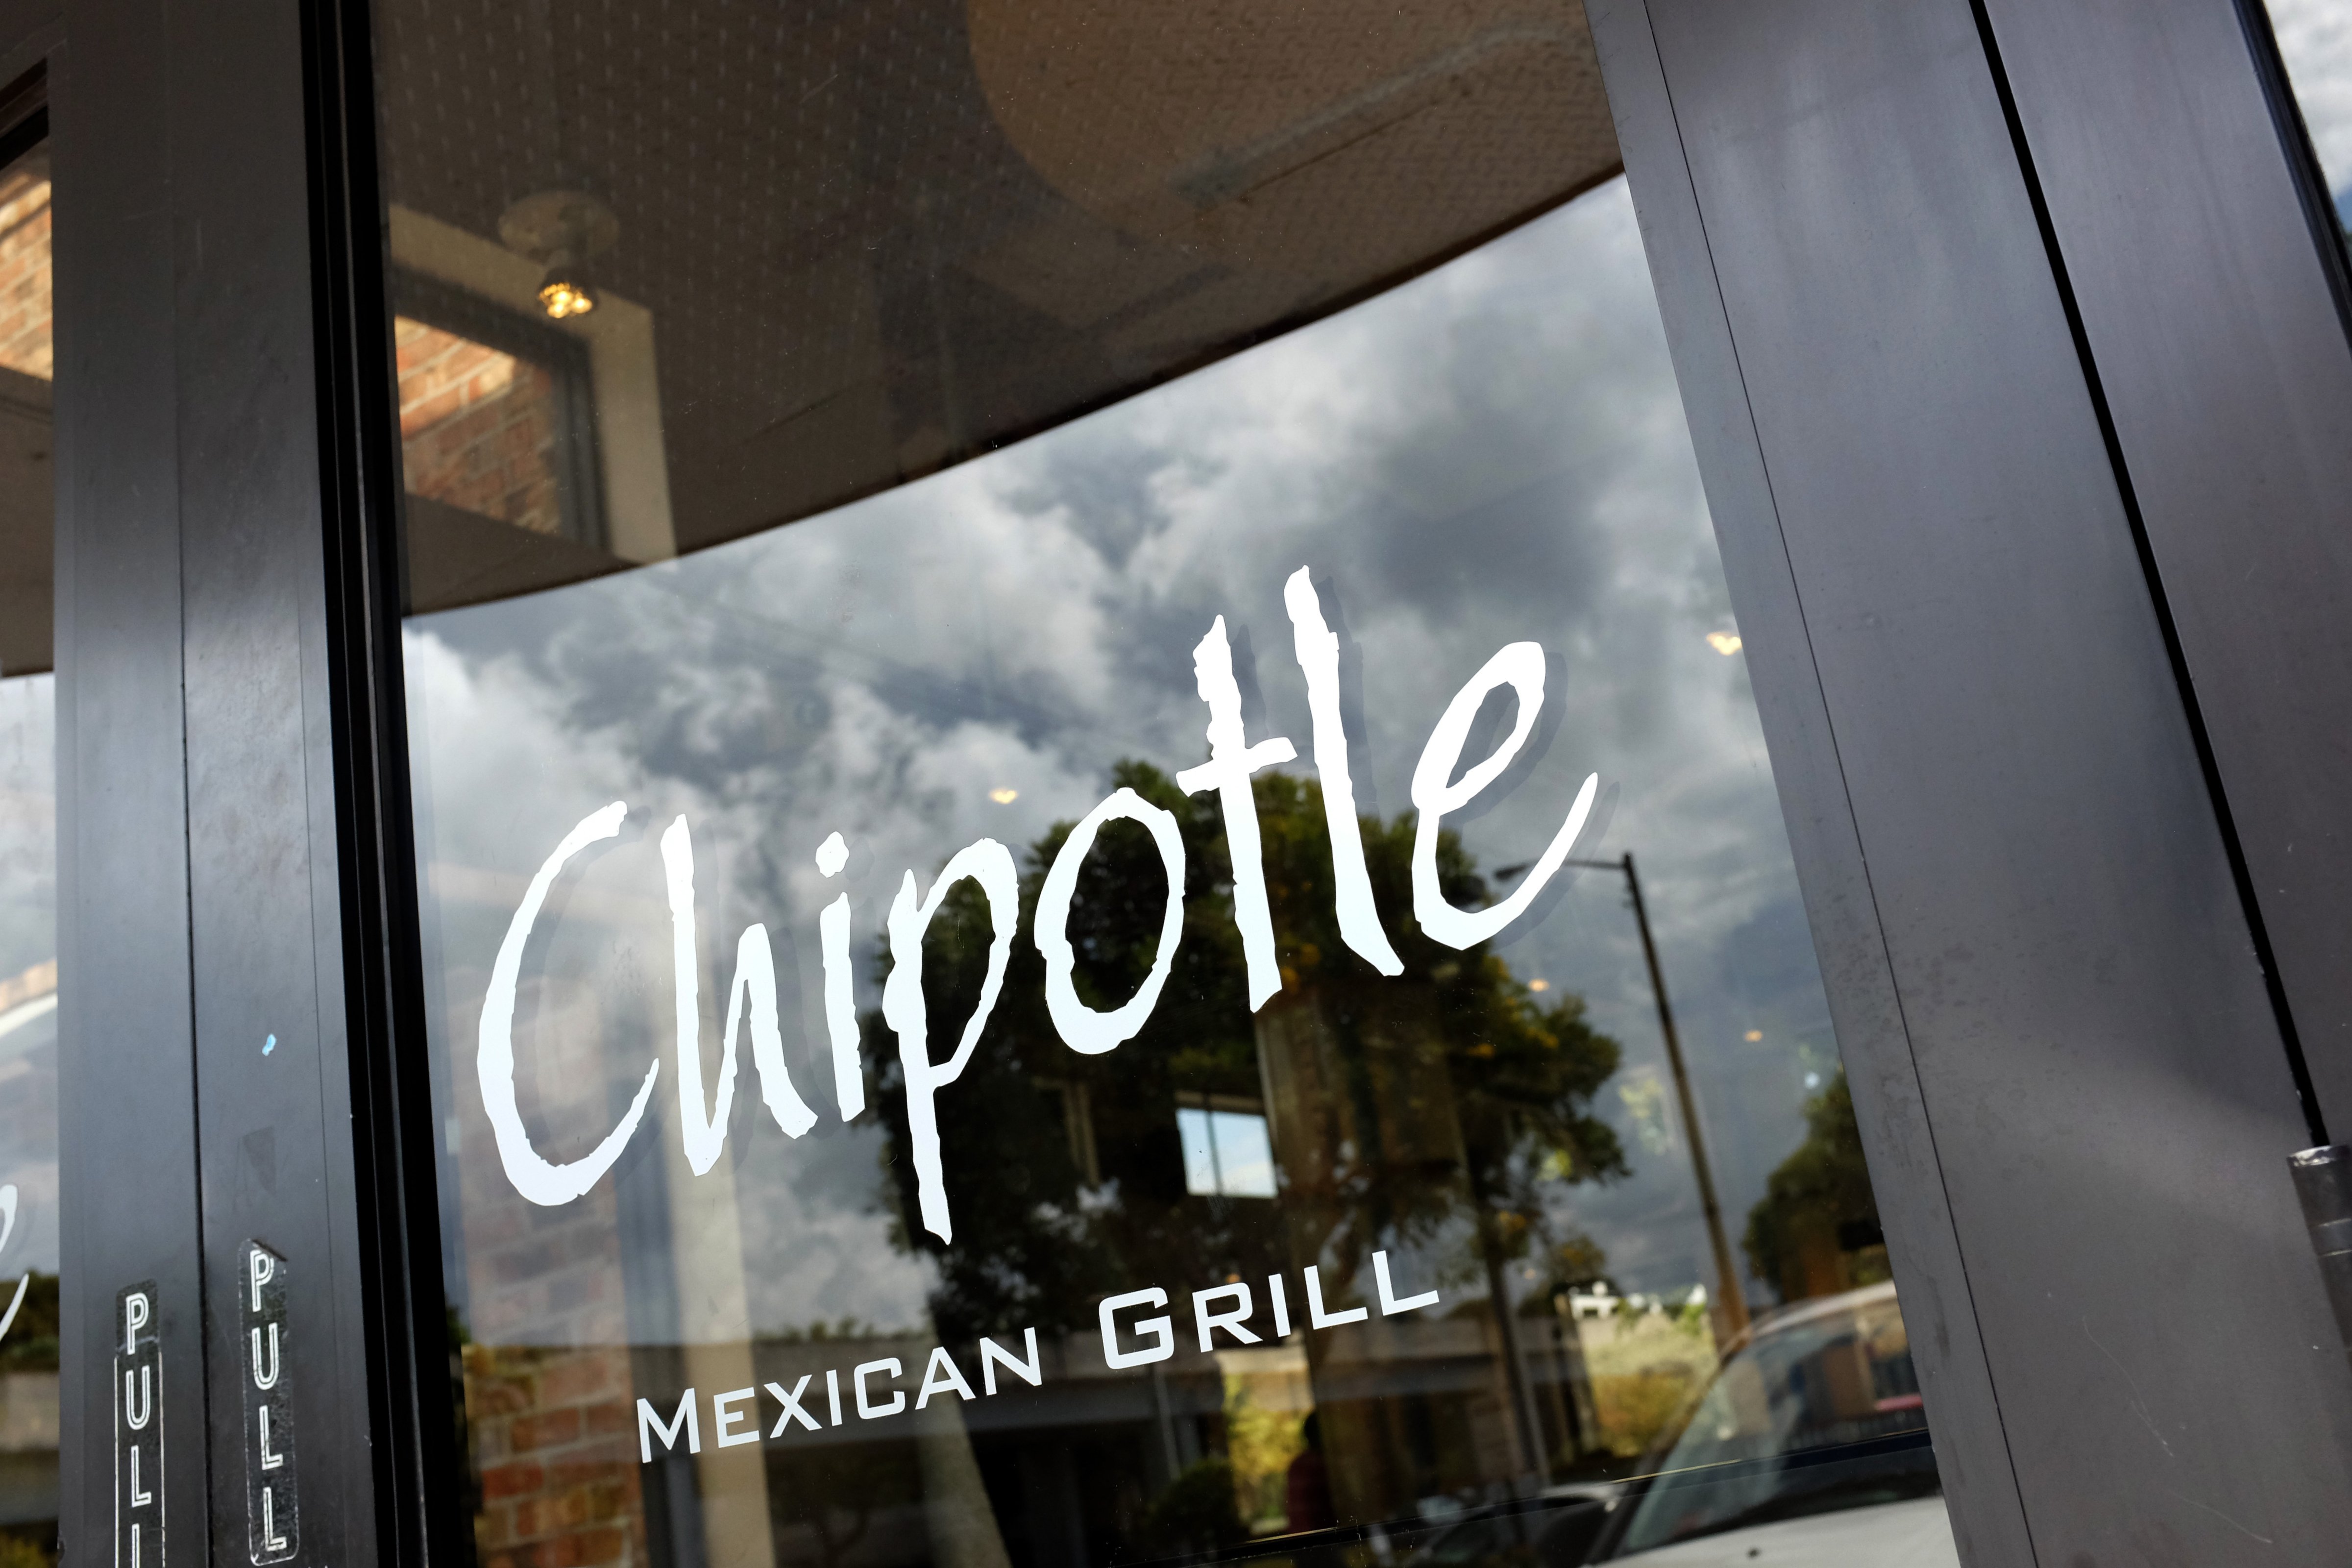 A Chipotle restaurant is seen on March 5, 2014 in Miami, Florida. (Joe Raedle—Getty Images)